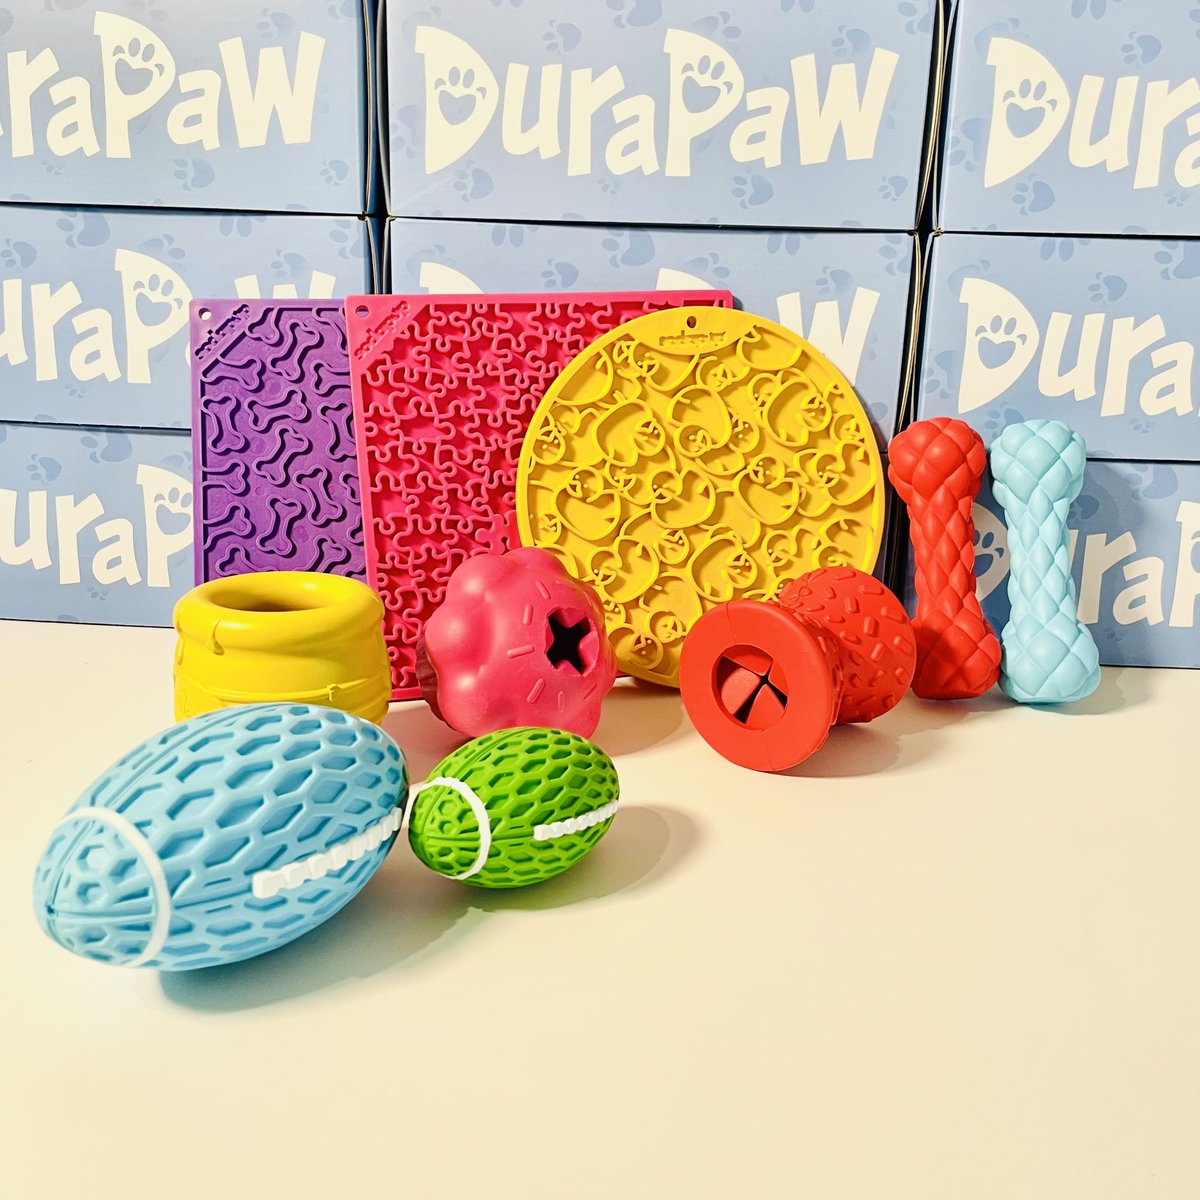 Endless possibilities to customize your box! 🐶📦

#durapaw #durapawdogtoys #happydog #happydogs #happydogsclub #happydoggy #happydogslife #subscription #subsciptionbox #subscriptionboxaddict #subscriptionaddiction #subscriptionservice #canadian #canadiansubscriptionbox